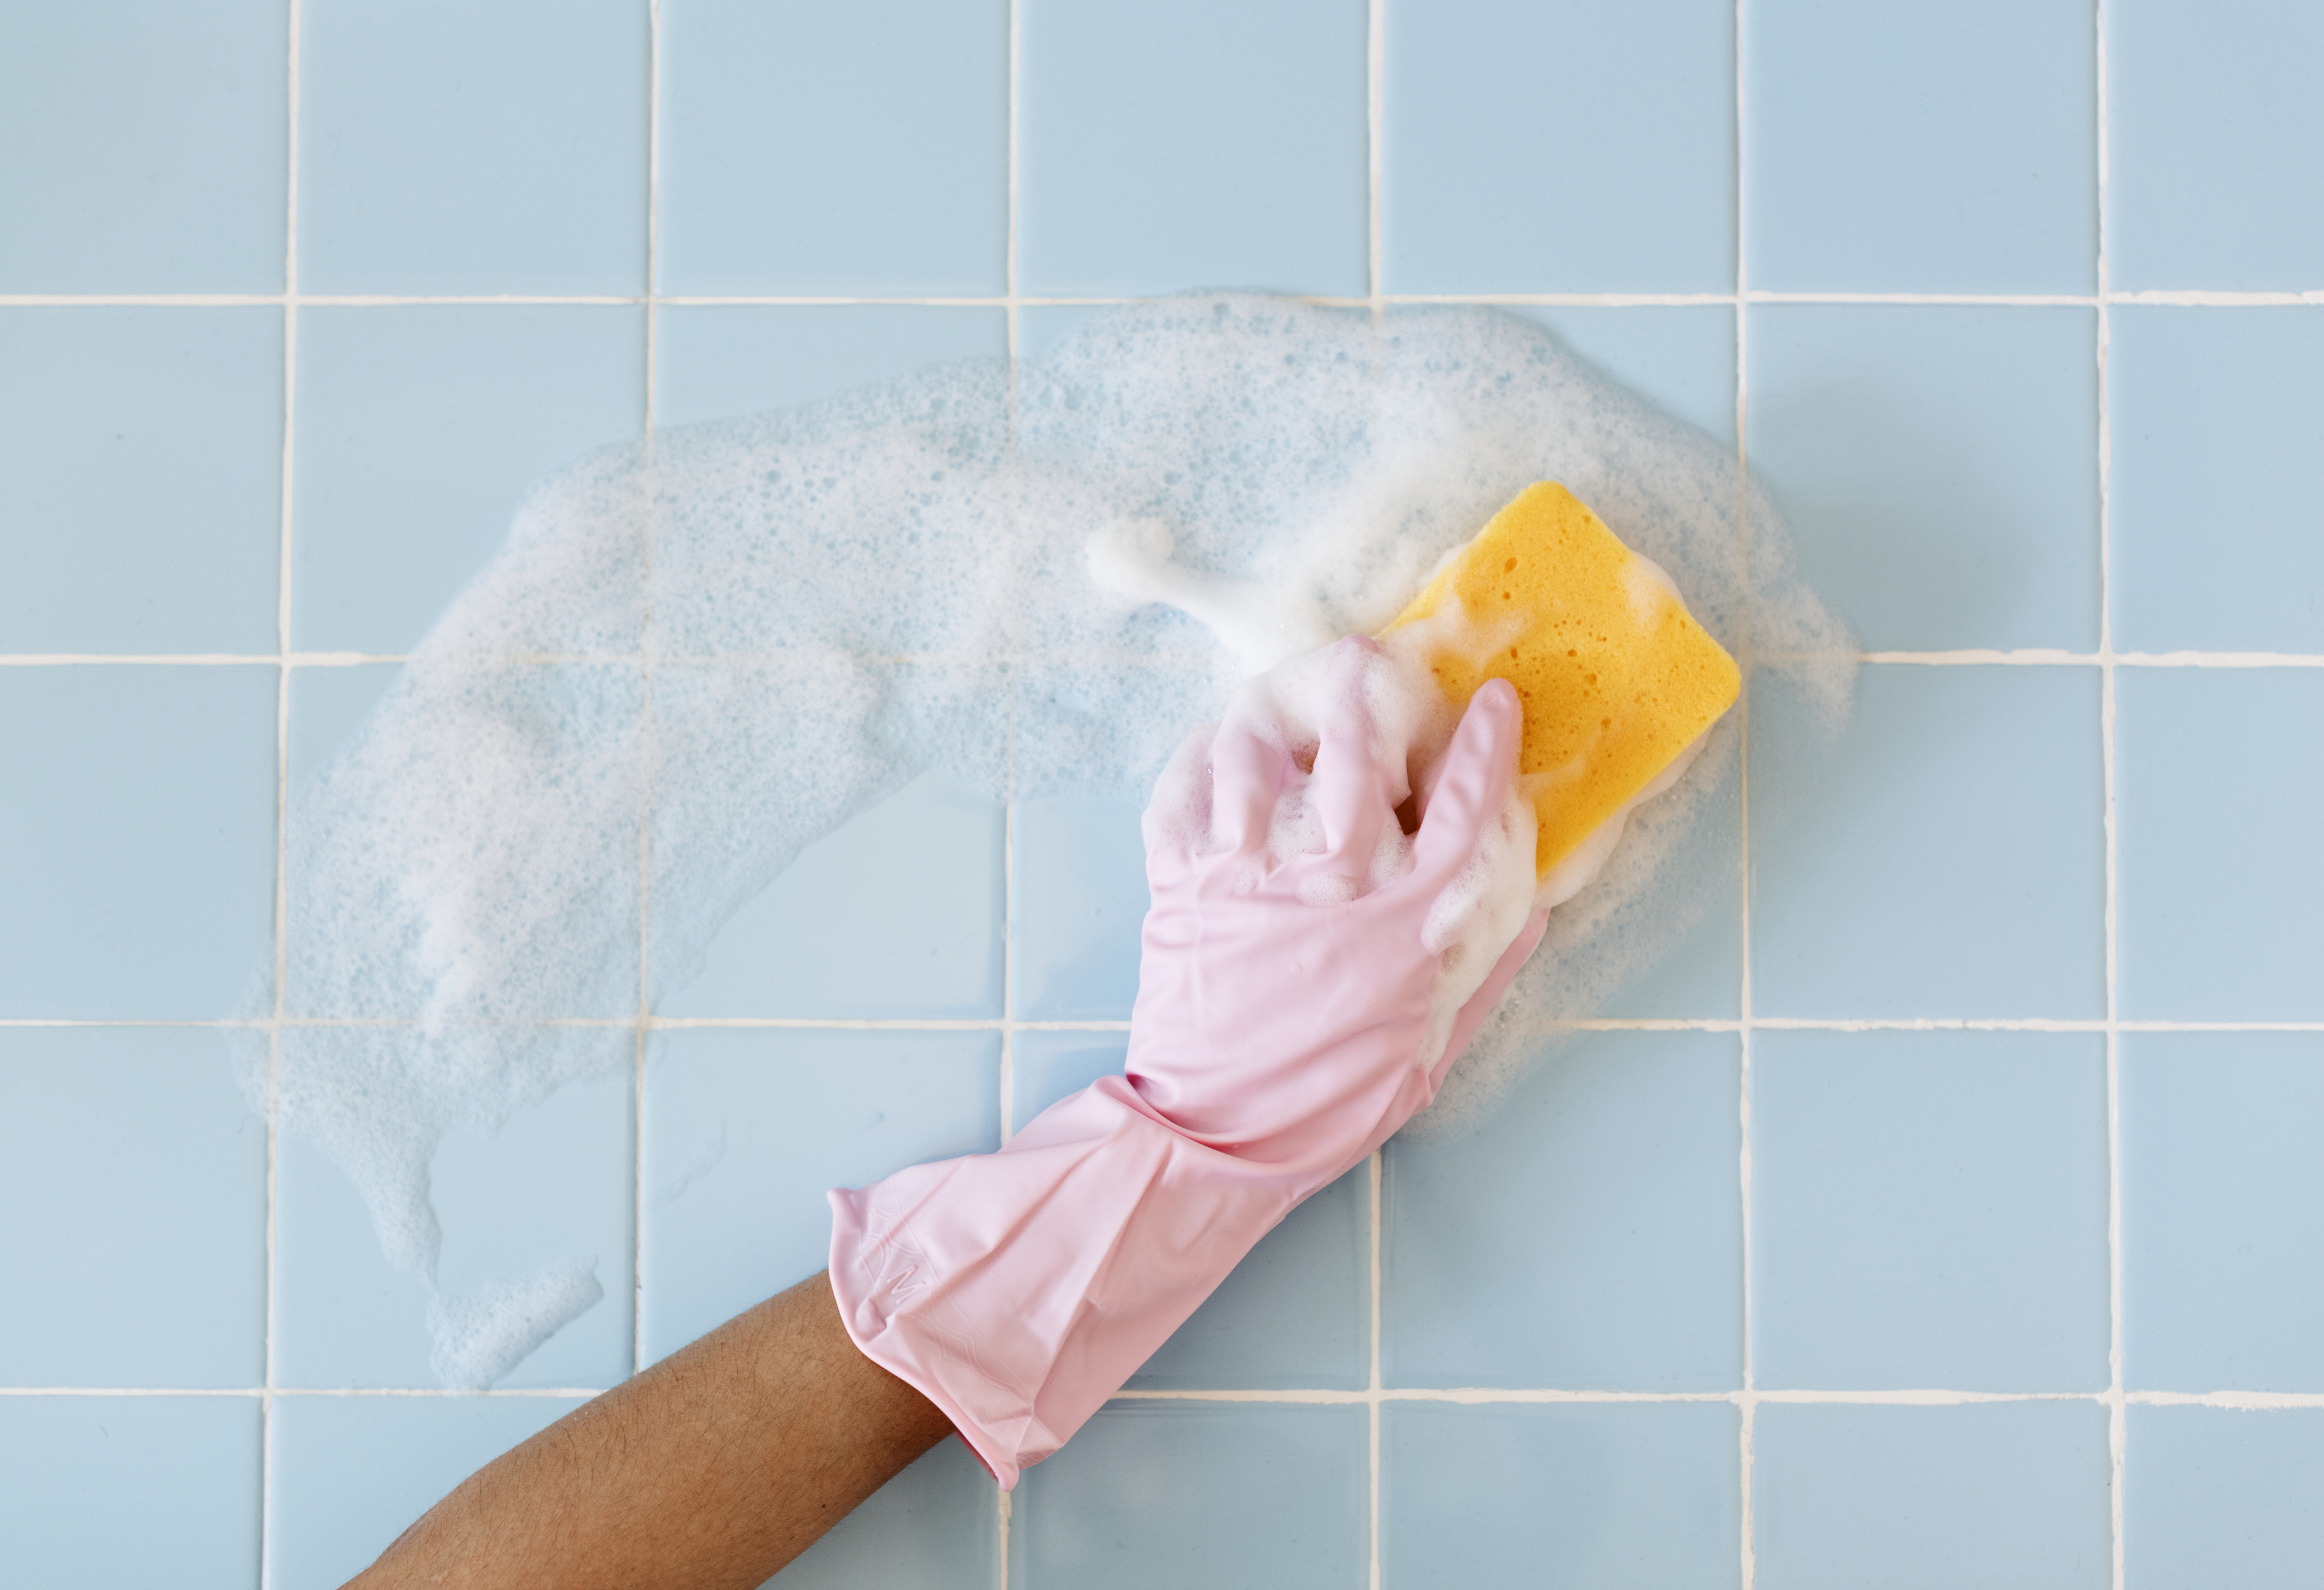 Pink glove and sponge cleaning